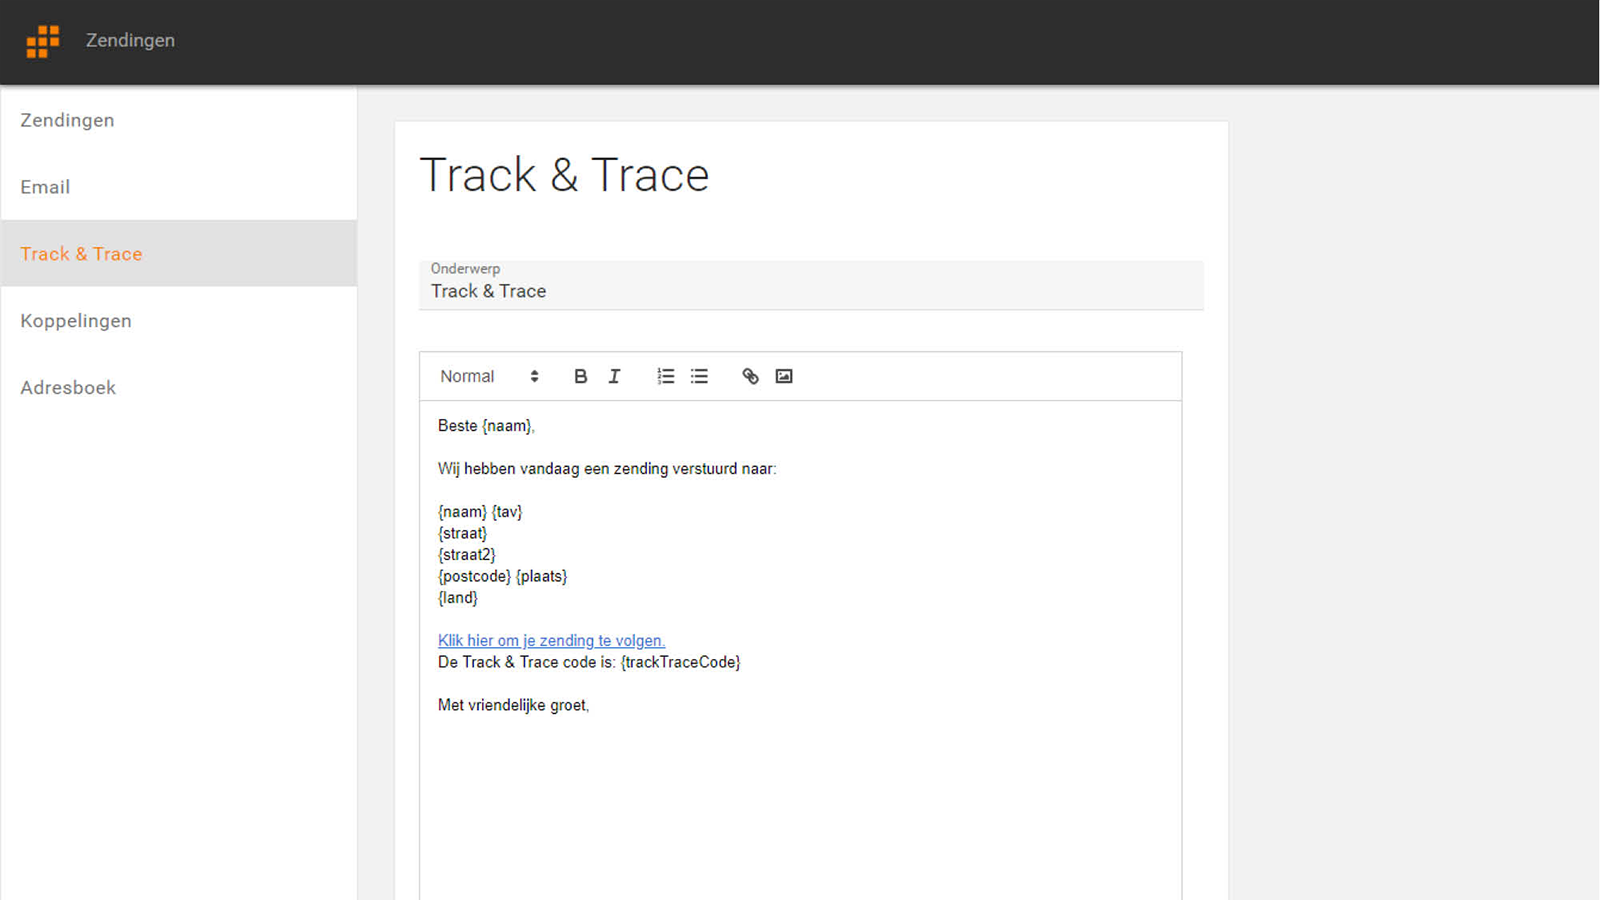 Send your own track & trace e-mails.